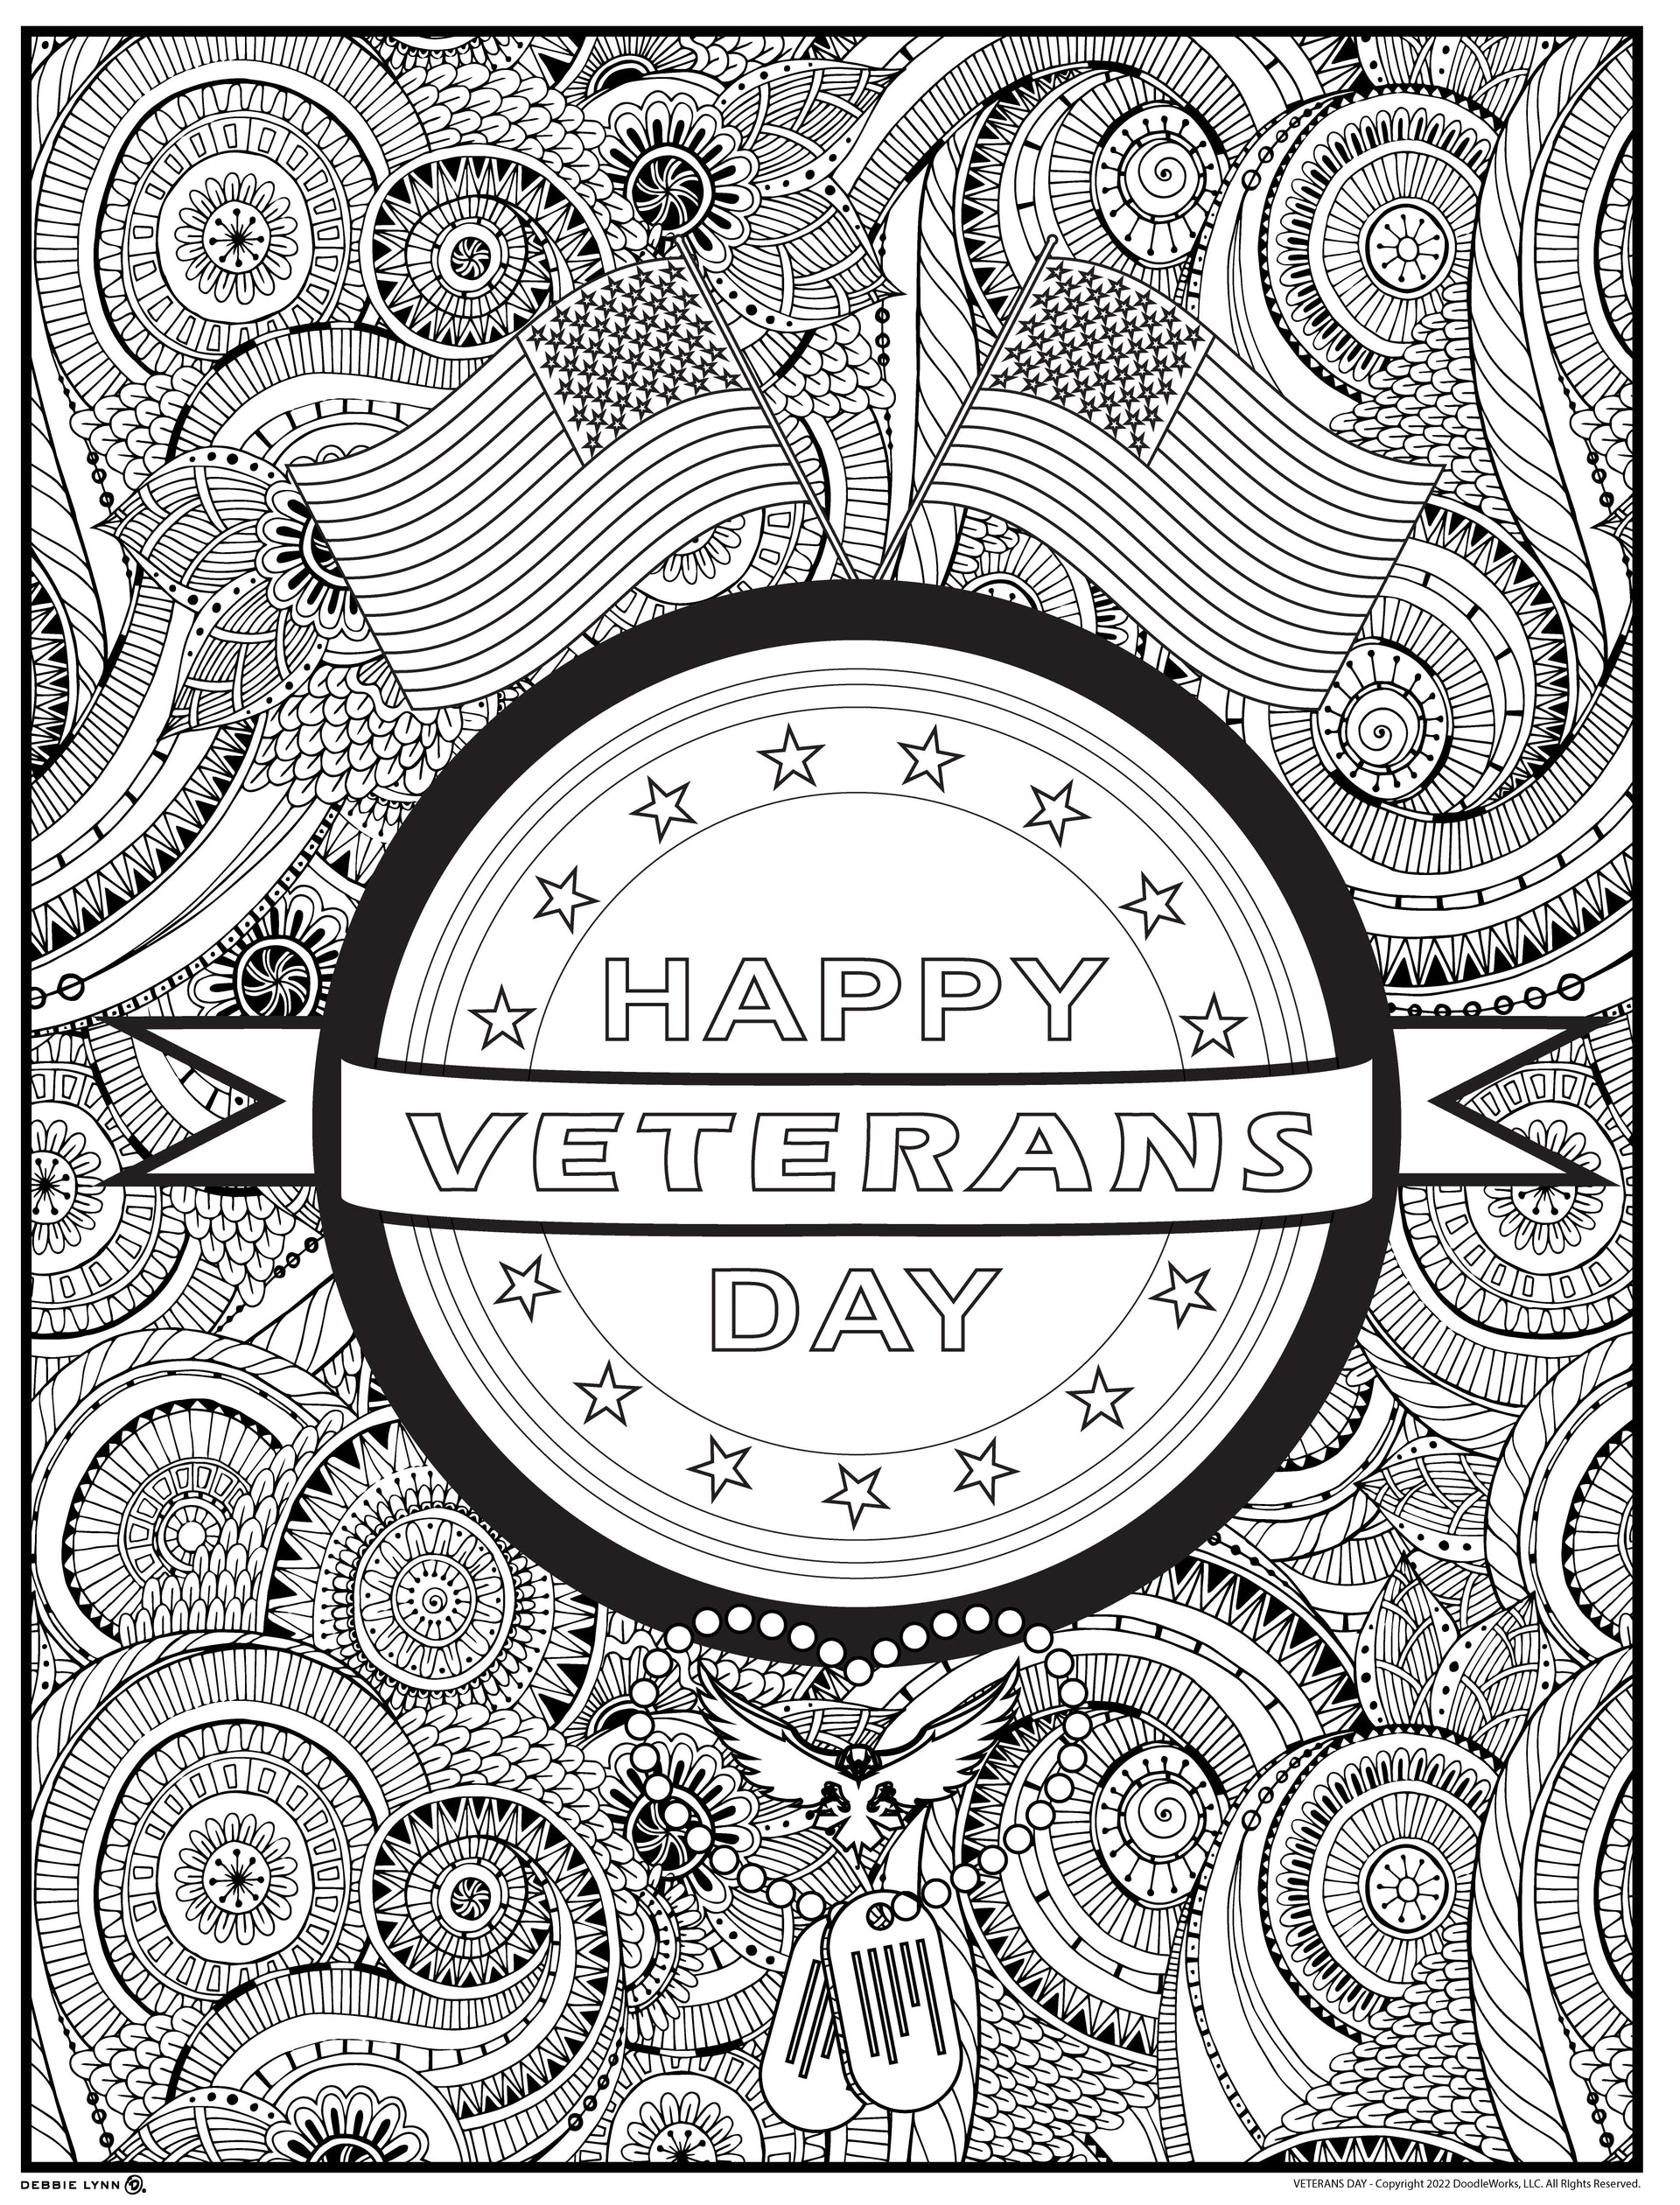 Veterans day personalized giant coloring poster x â debbie lynn